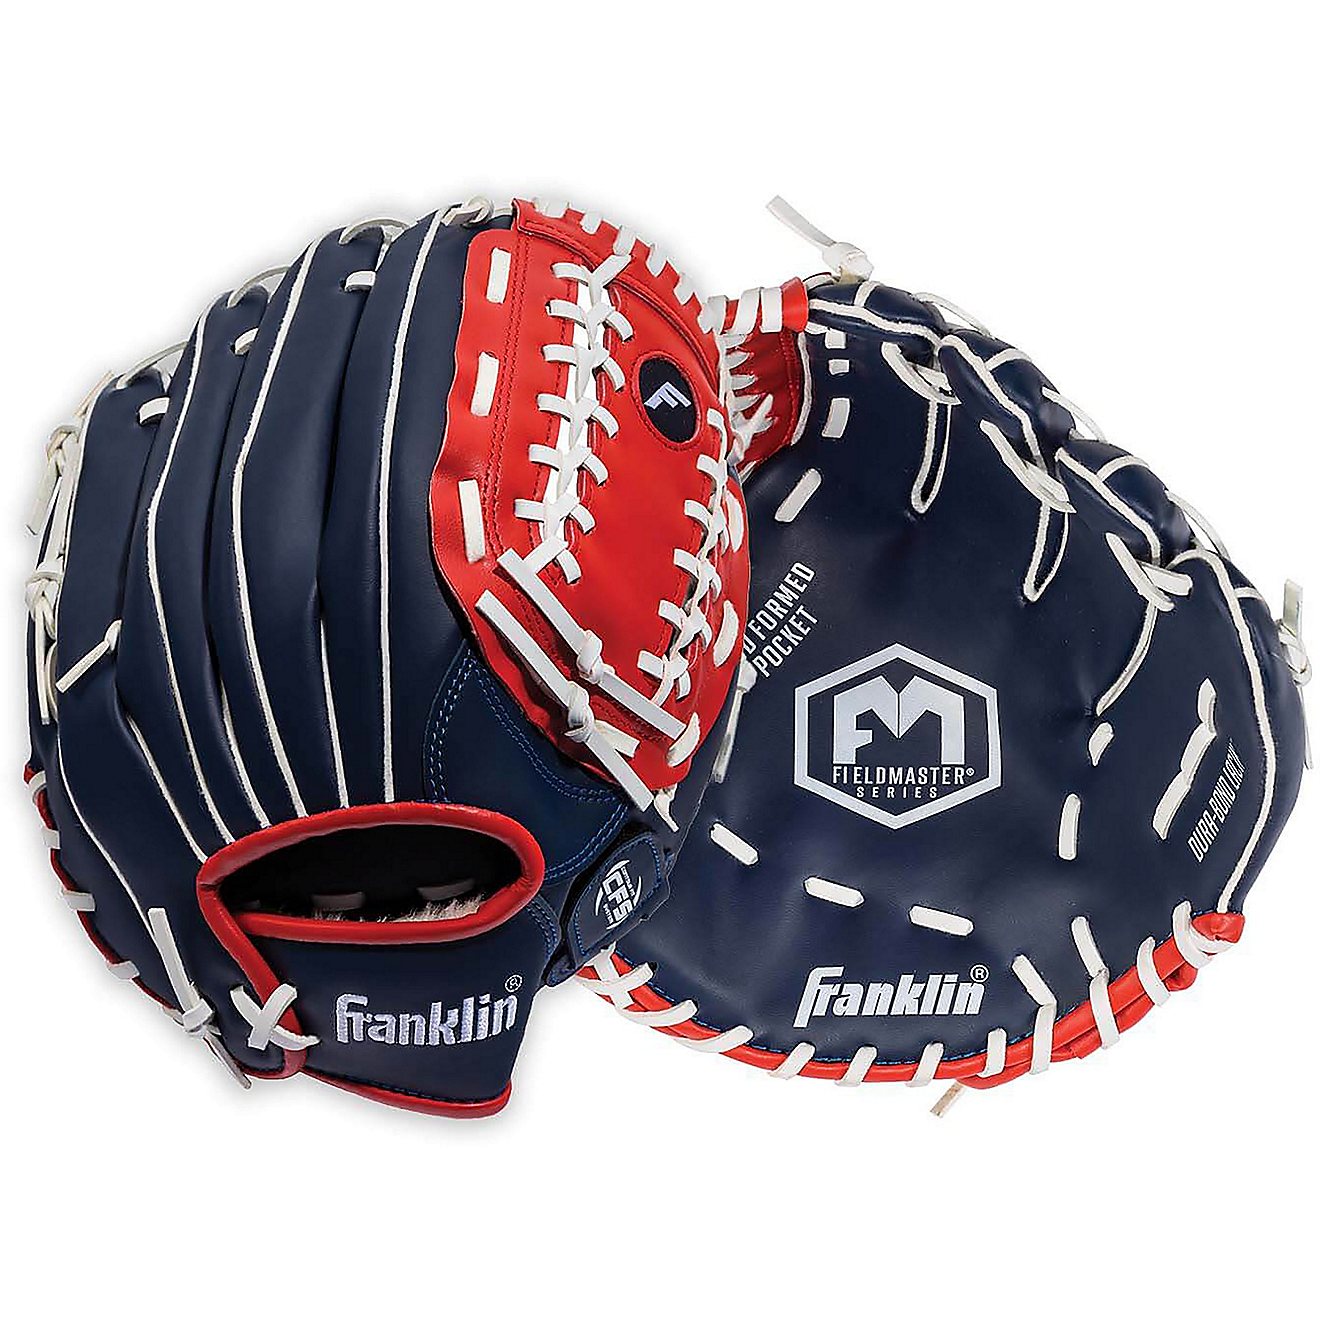 Franklin Field Master USA Series Baseball Glove                                                                                  - view number 1